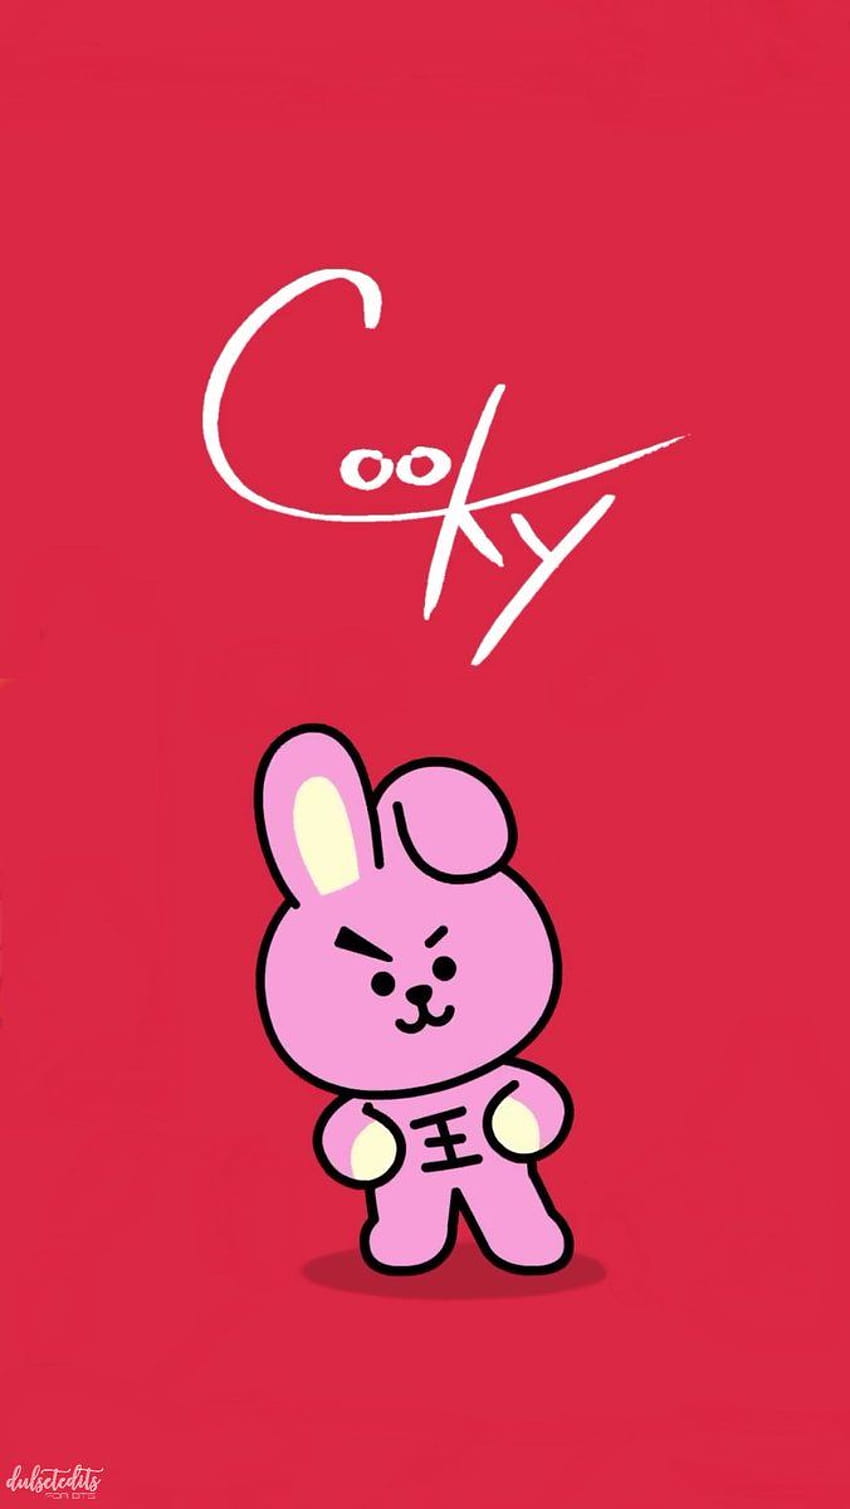 BTS BT21- COOKY: Back to School College Ruled Composition Journal for  Students For Boys And Girls : BT21, BTS: Amazon.sg: Books